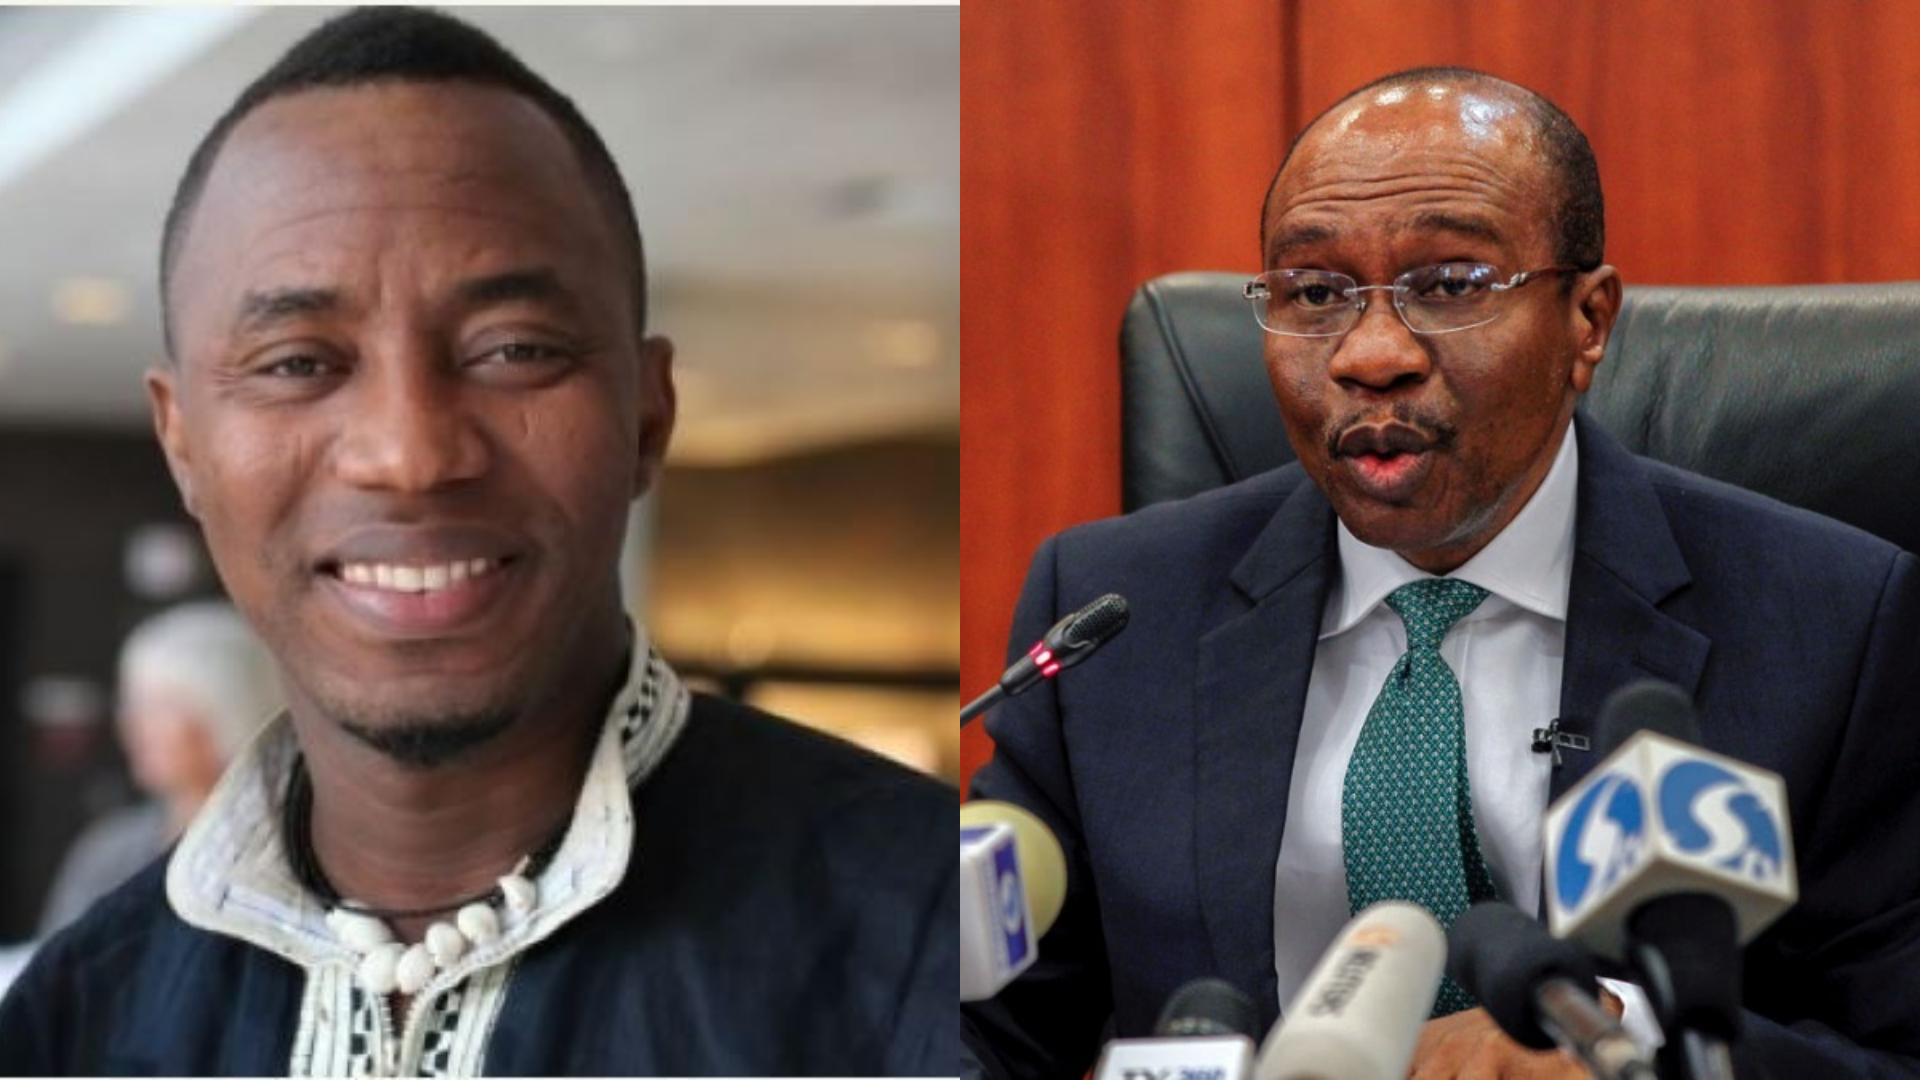 Omoyele Sowore, the 2023 presidential candidate of the African Action Congress (AAC), has expressed support for the suspension of Godwin Emefiele, the Governor of the Central Bank of Nigeria (CBN).